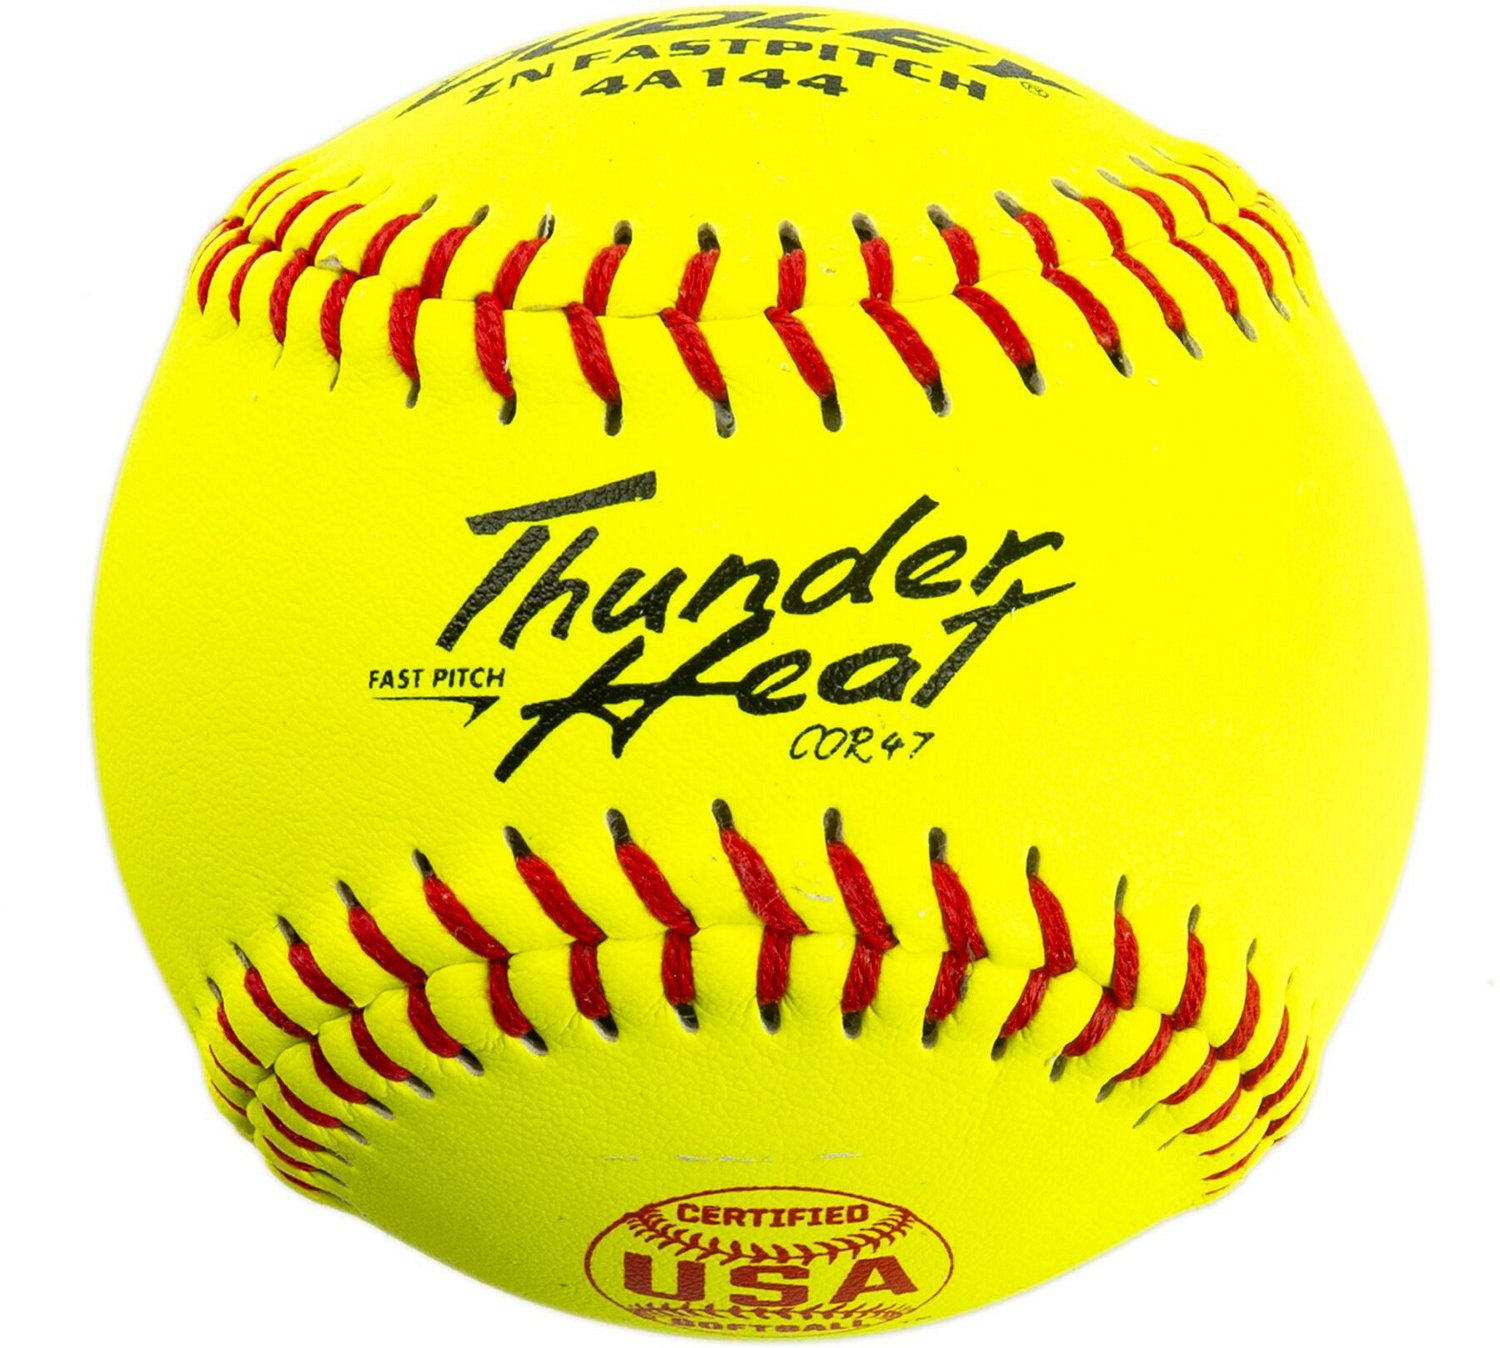 Dudley 11 in USA Thunder Heat Fast-Pitch Gameball Softball                                                                       - view number 1 selected